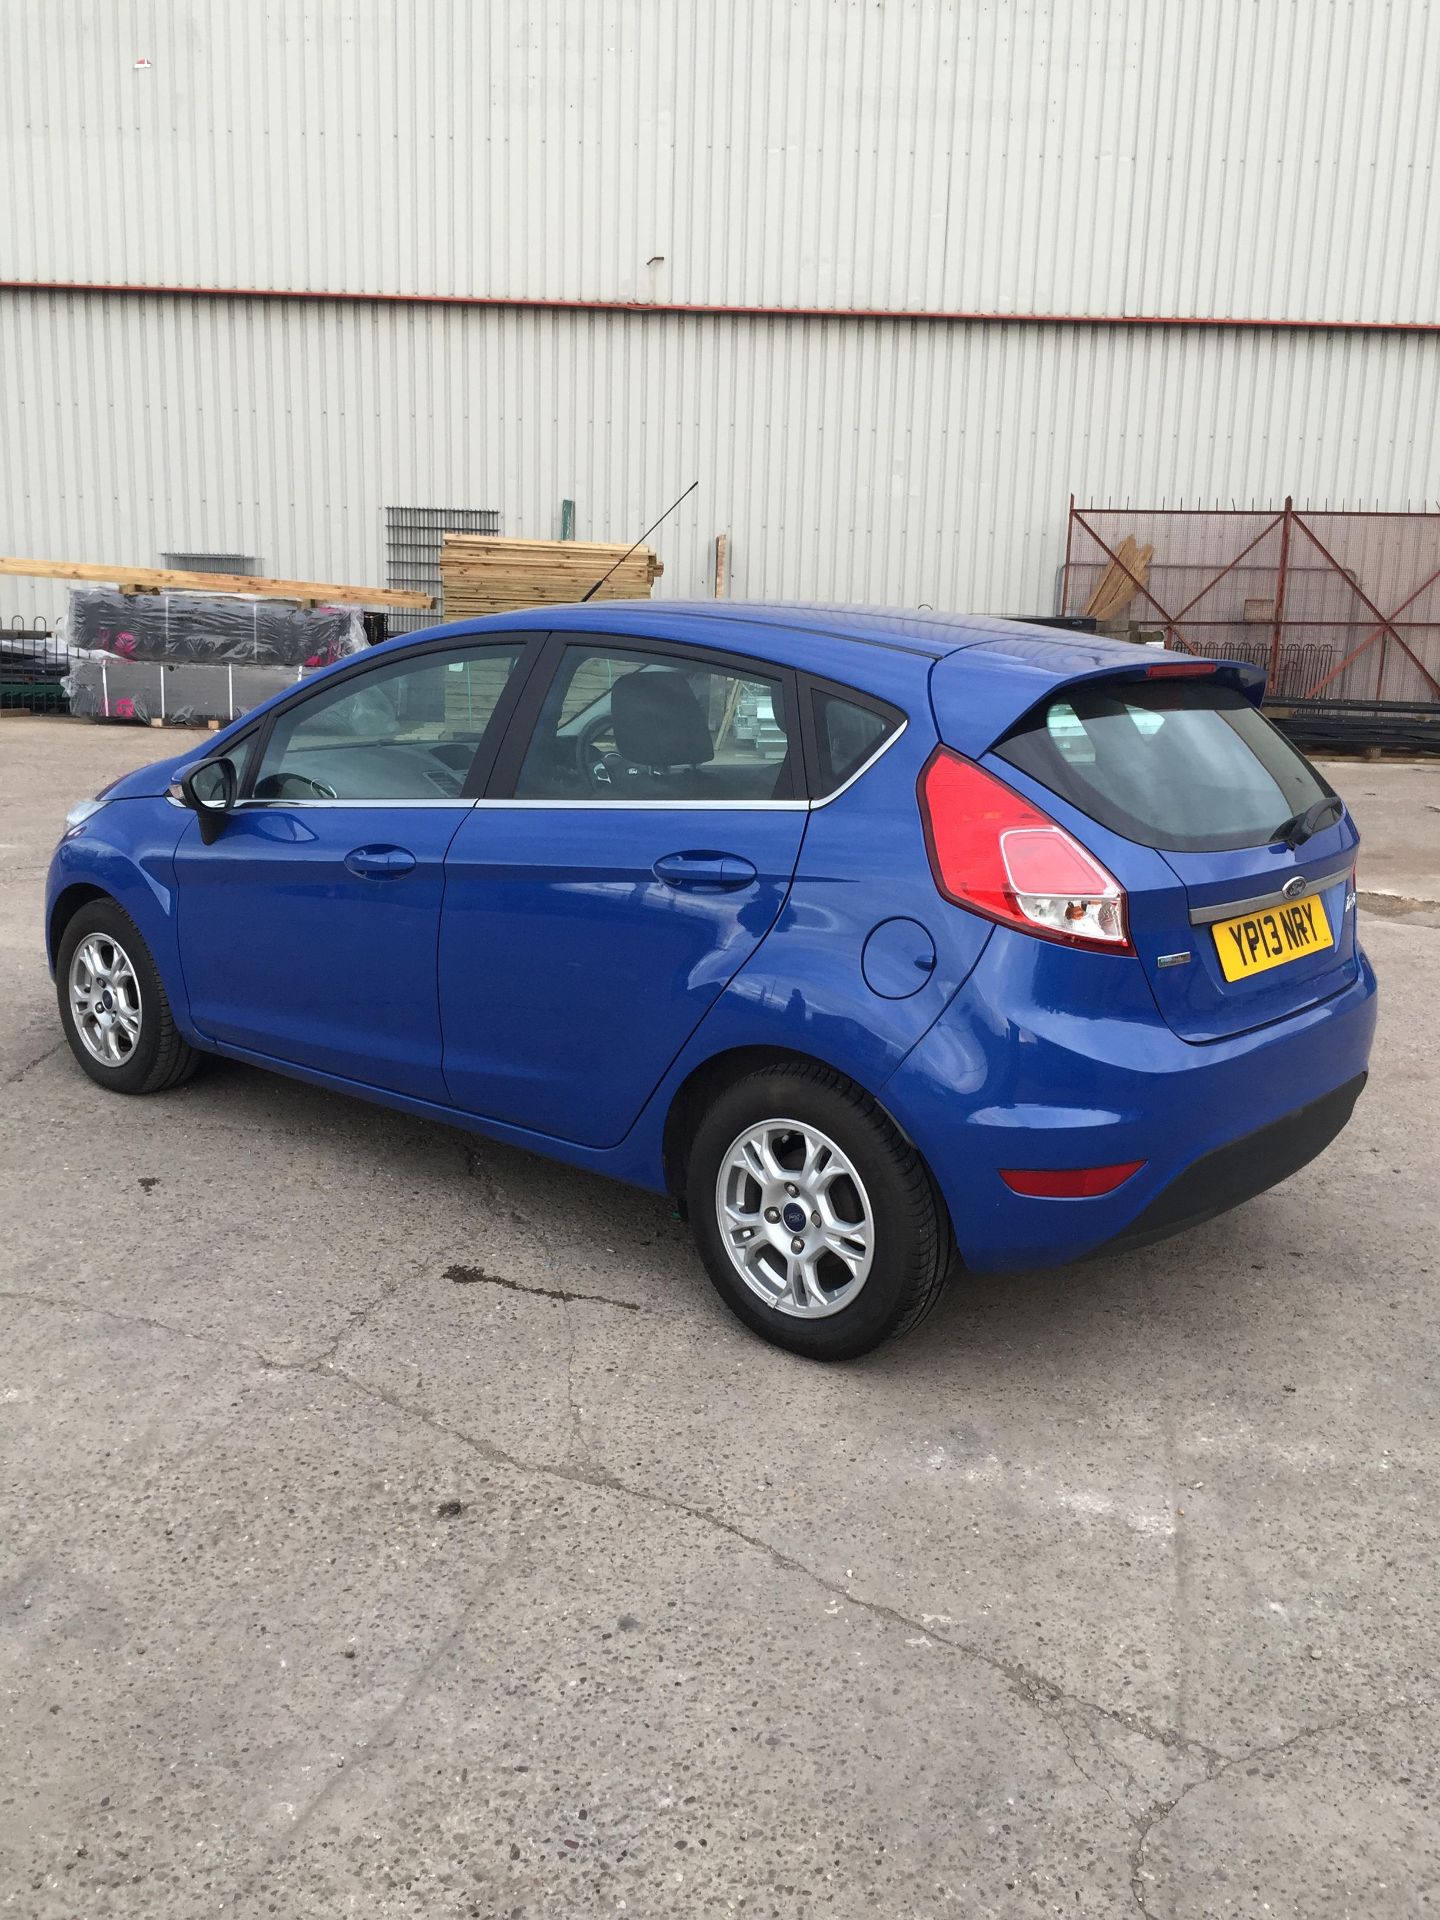 13 Plate FORD FIESTA ZETEC Econetic TDCI - YP13 NRY - Blue - 5 door hatchback - Tax expired 1st Feb - Image 5 of 17